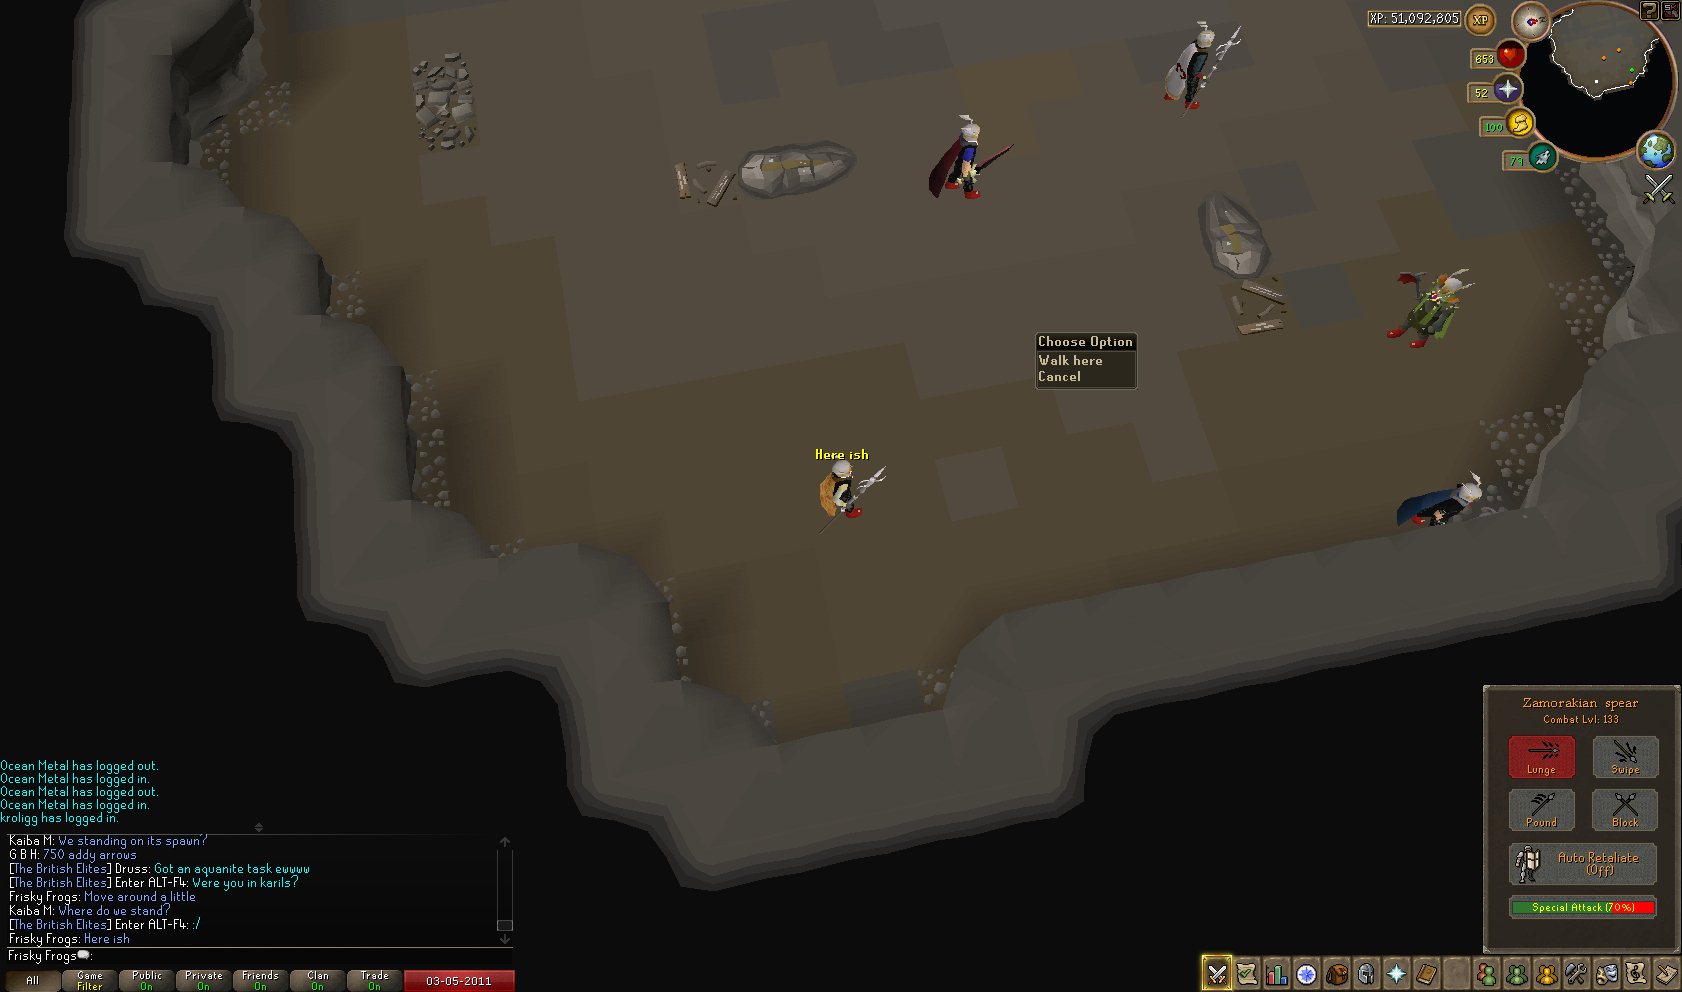 Form a circle/box around corp's spawn point